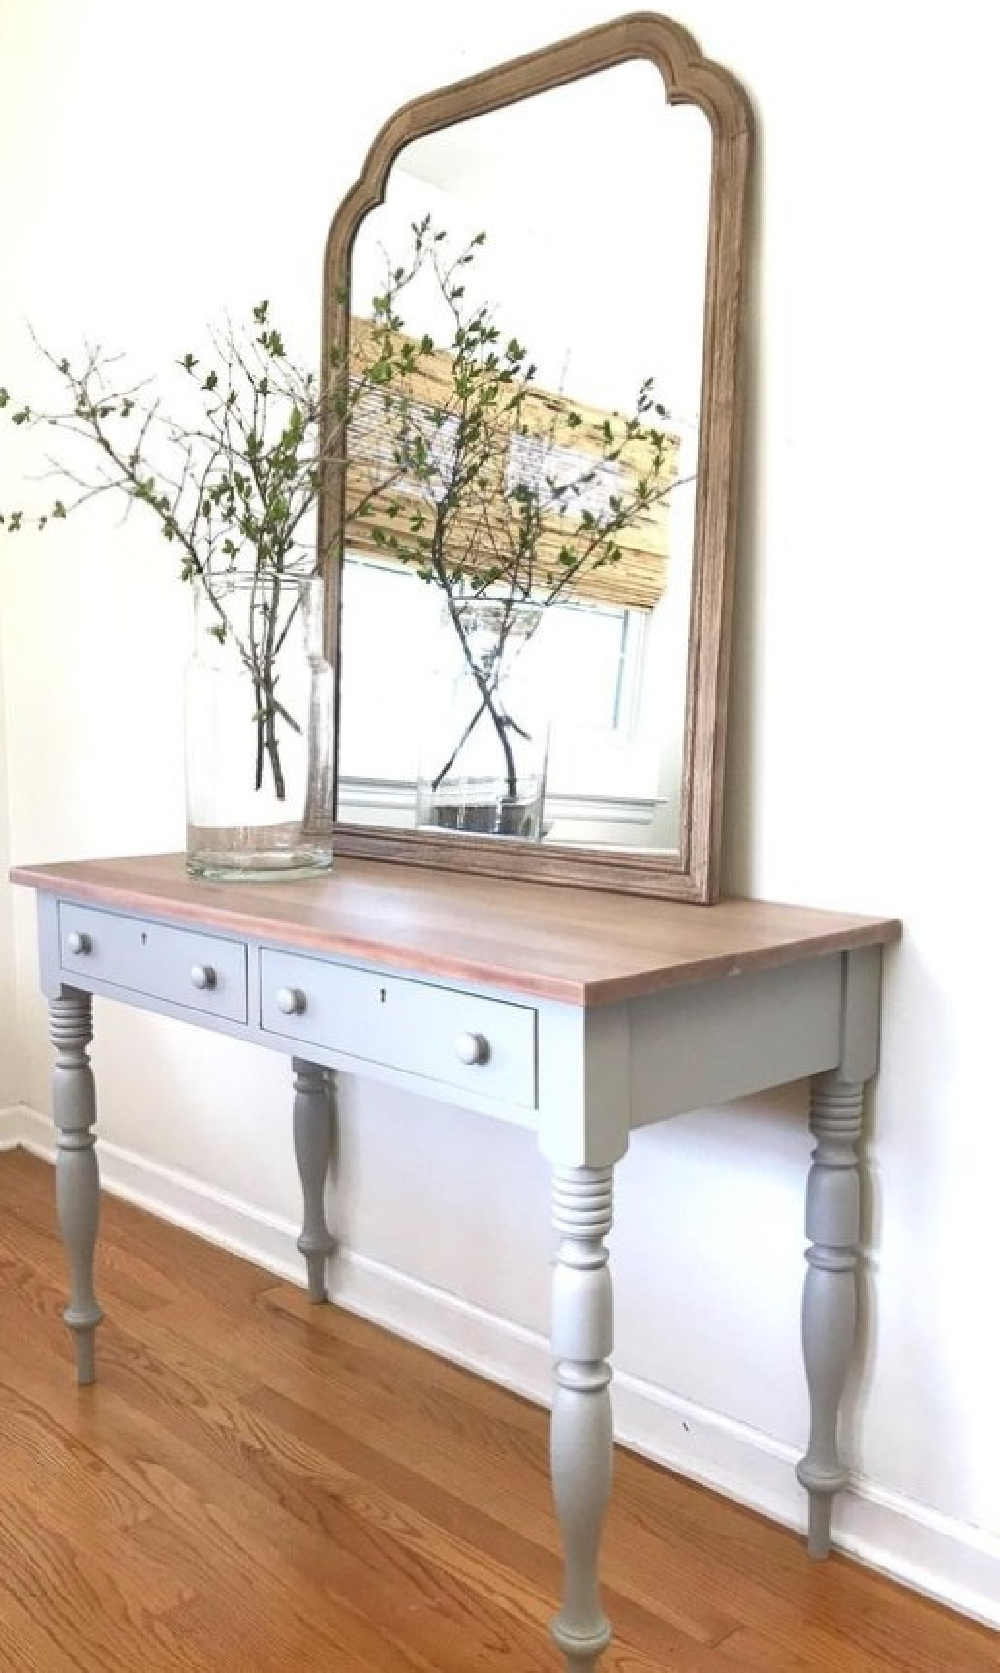 BM Cape May Cobblestone painted console table - @_studio.remade_